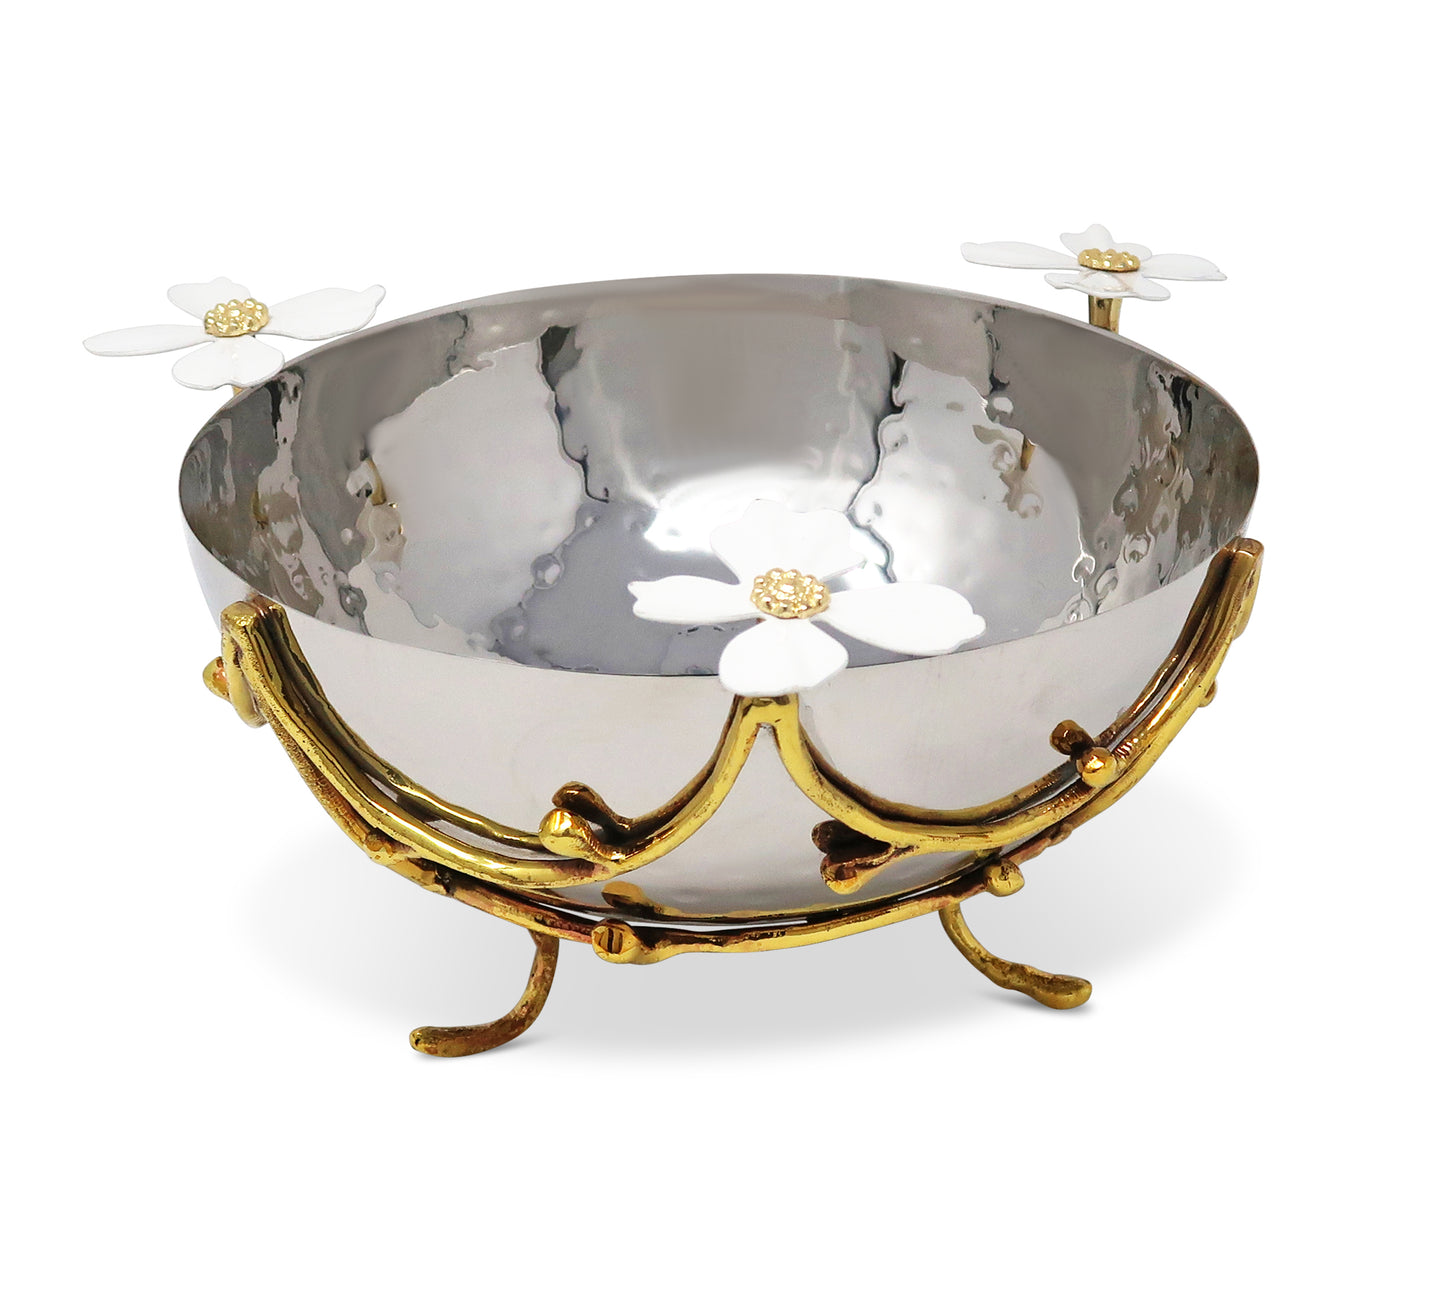 Stainless Steel Bowl with Jewel Flower Design, 7